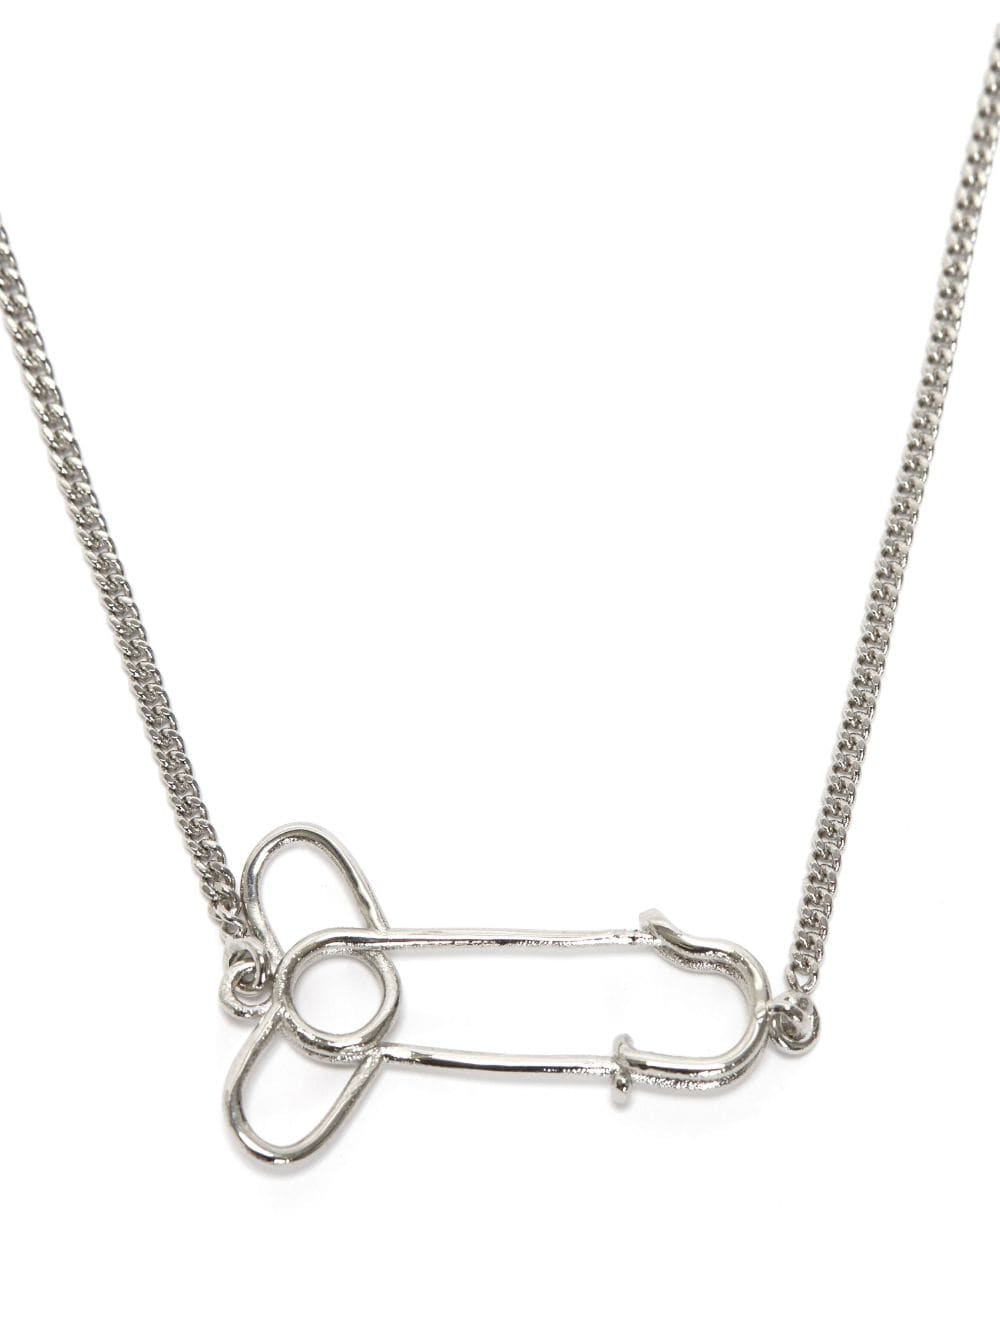 JW Anderson safety-pin pendant necklace - Silver von JW Anderson